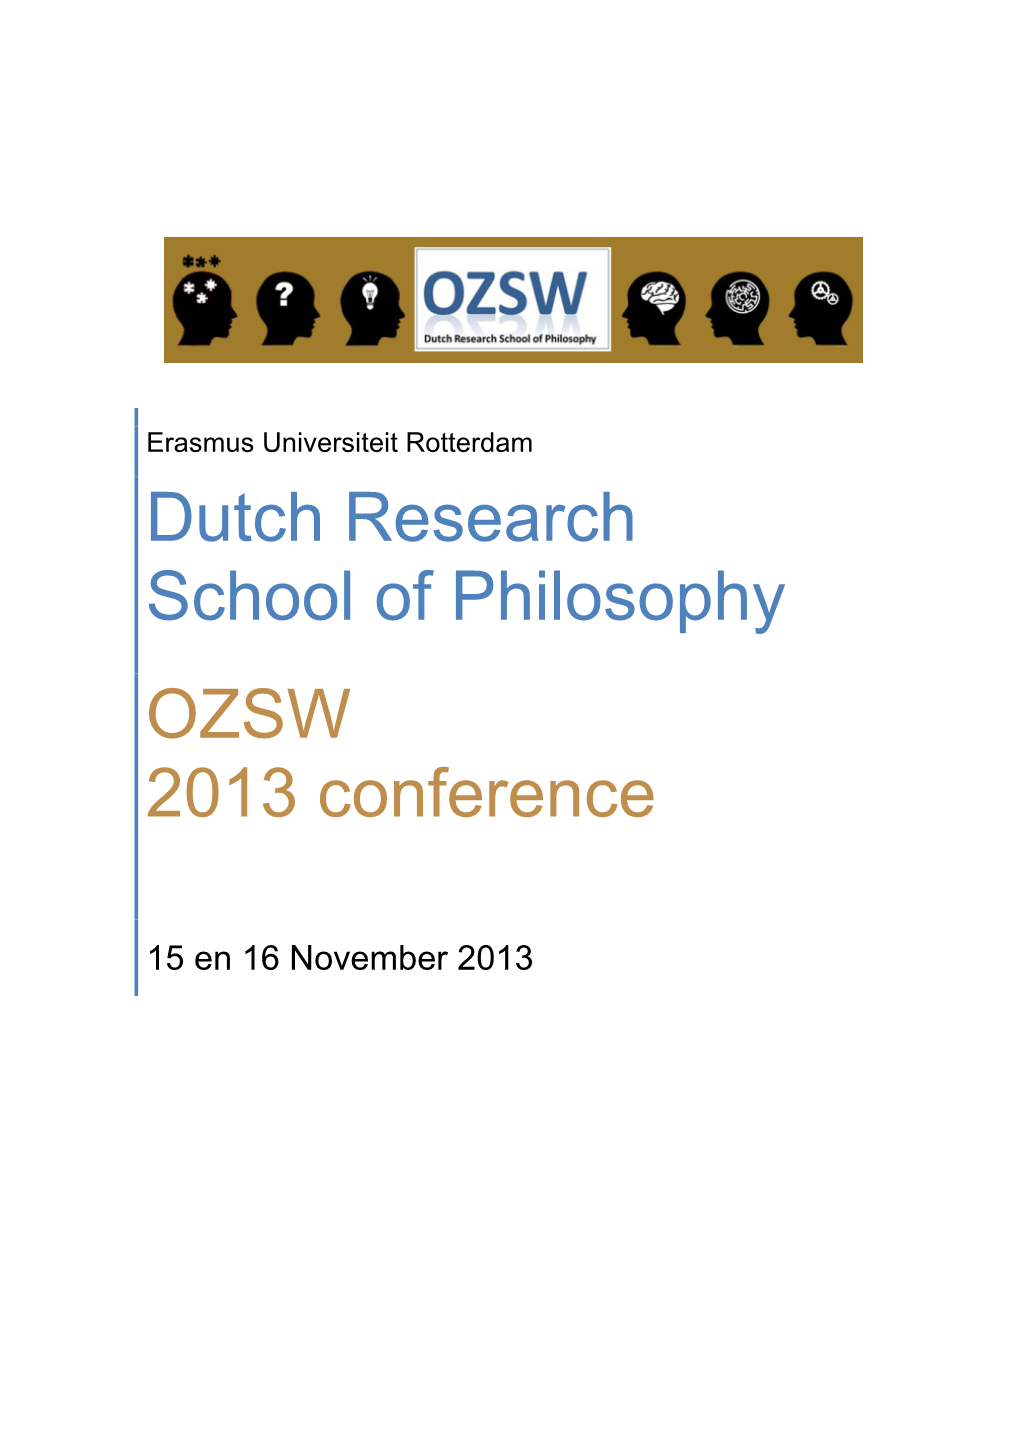 Dutch Research School of Philosophy OZSW 2013 Conference